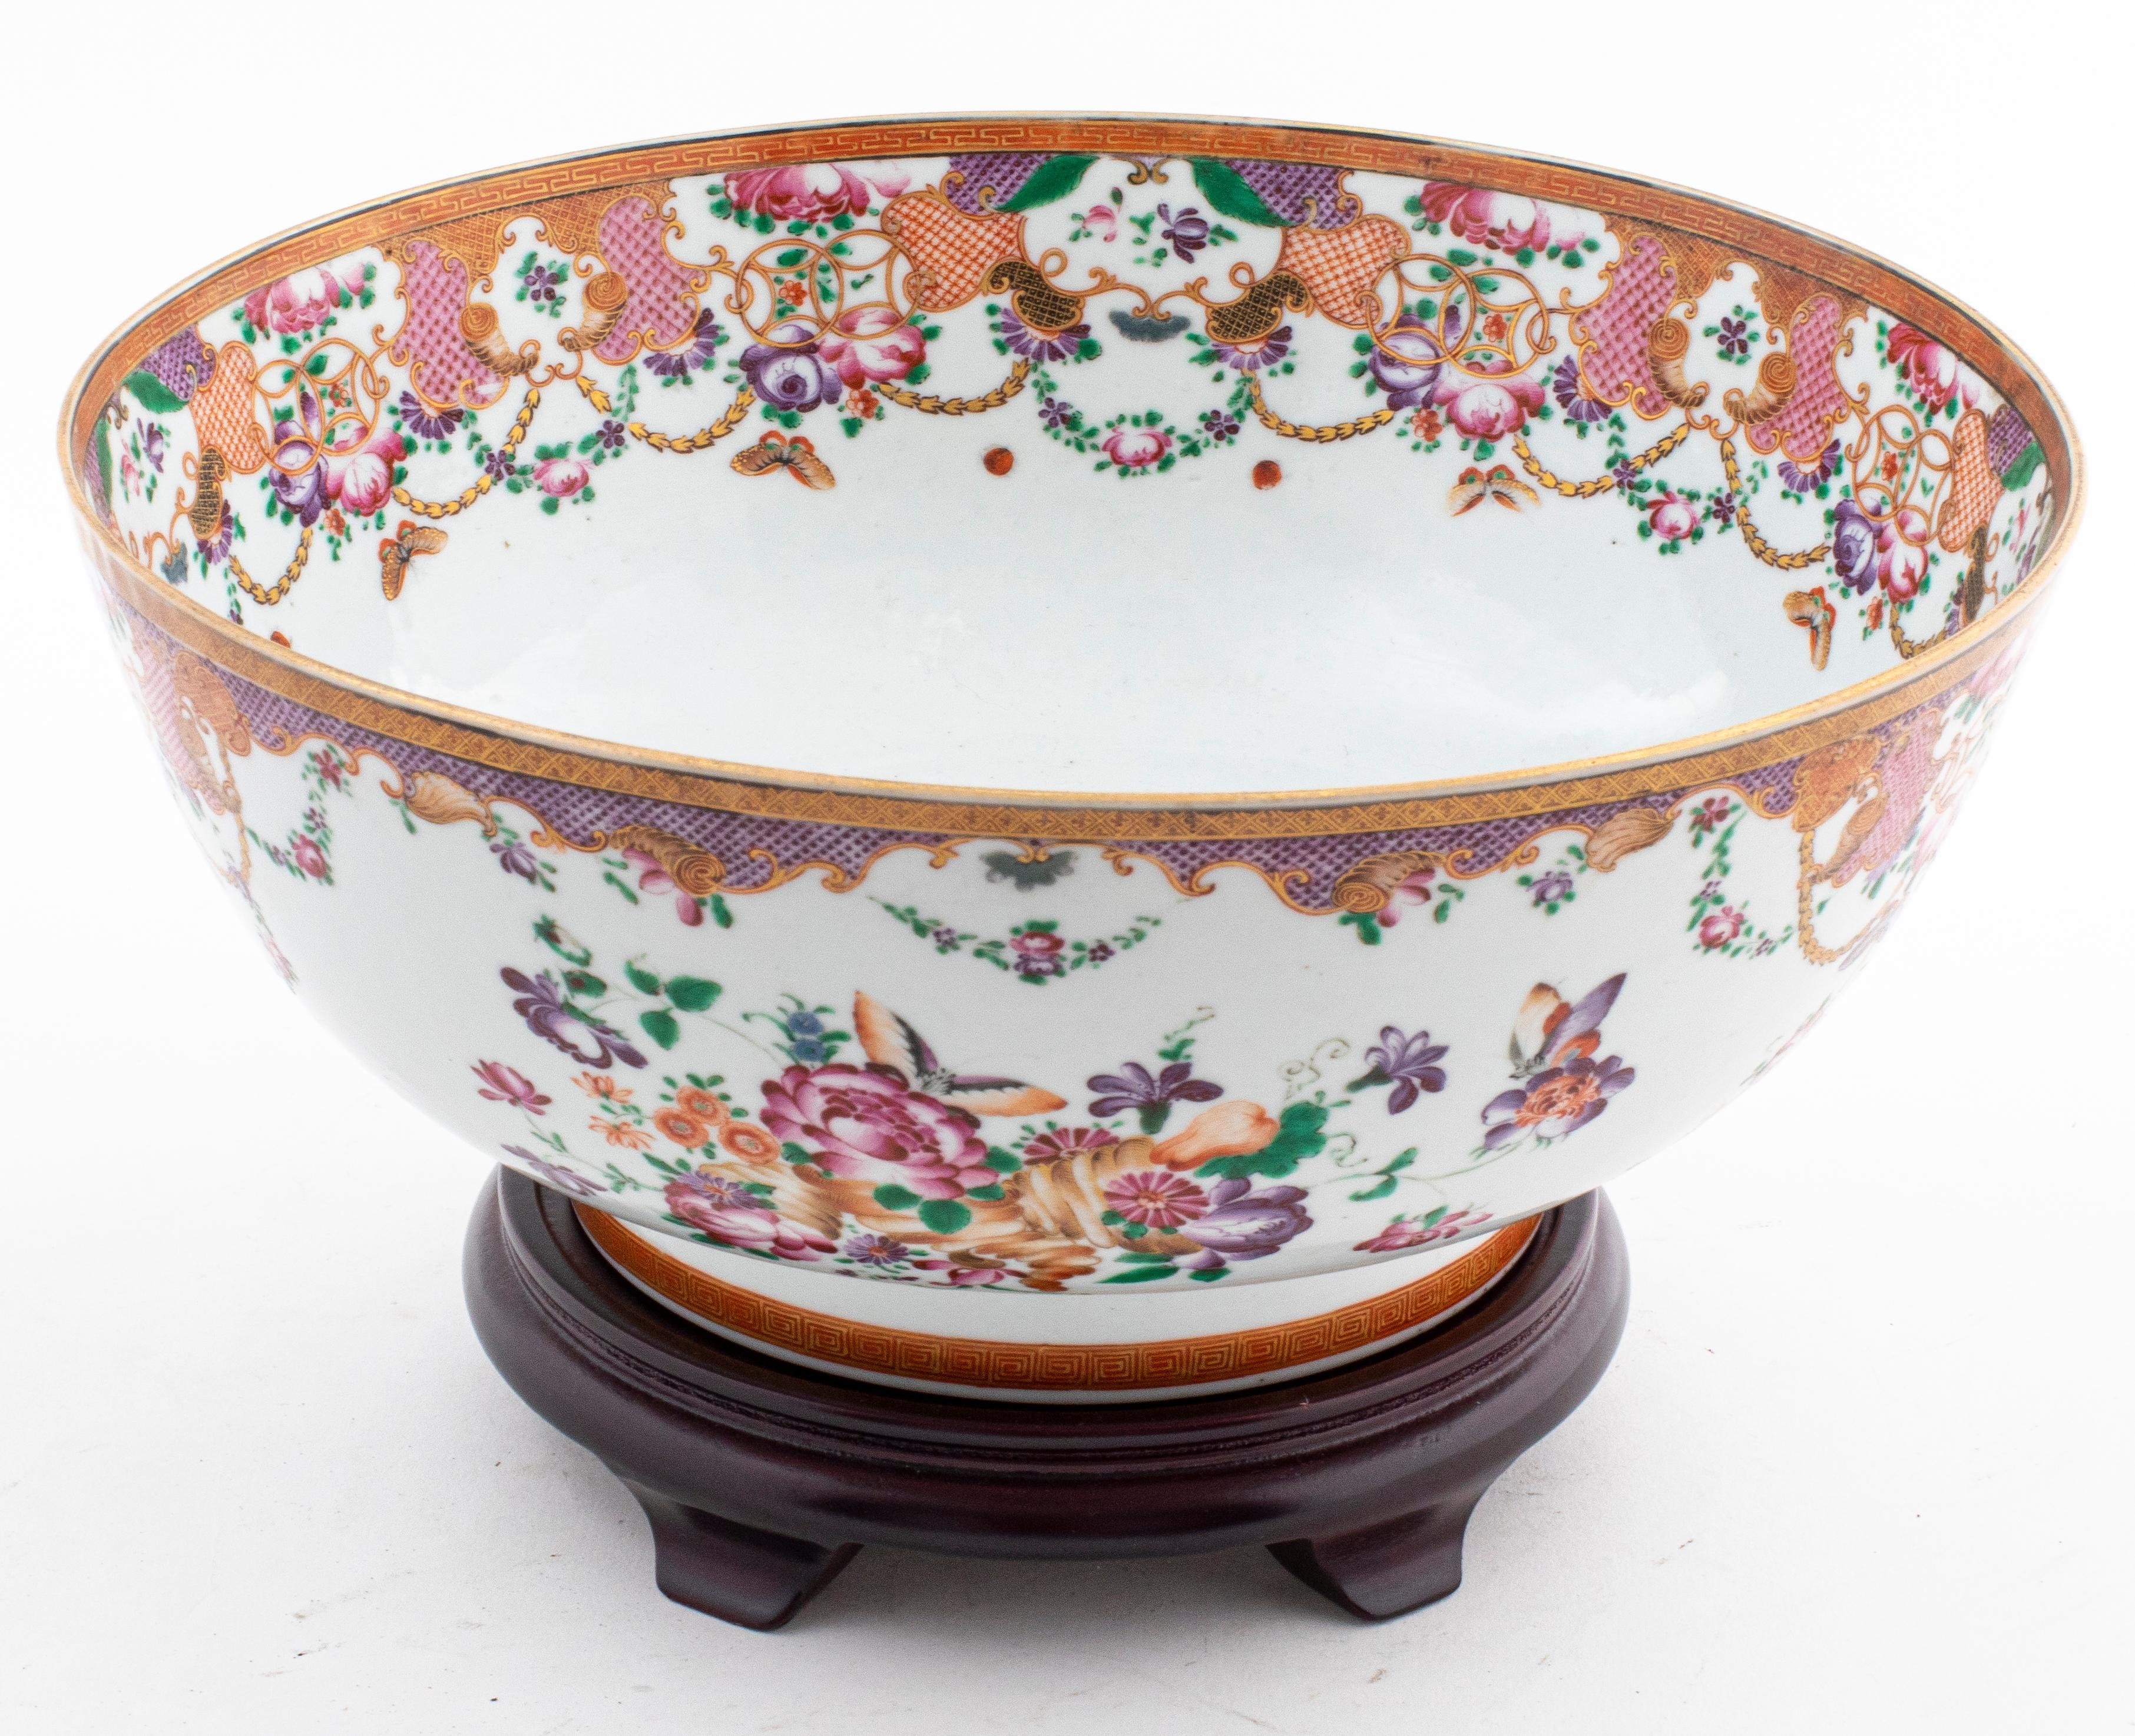 Chinese Qianlong period 18th century export porcelain punch bowl with 'Compagnie des Indes' baroque decor and rich detailed gilding. Removed from a 983 Park Avenue estate. 

Measures: 4.75